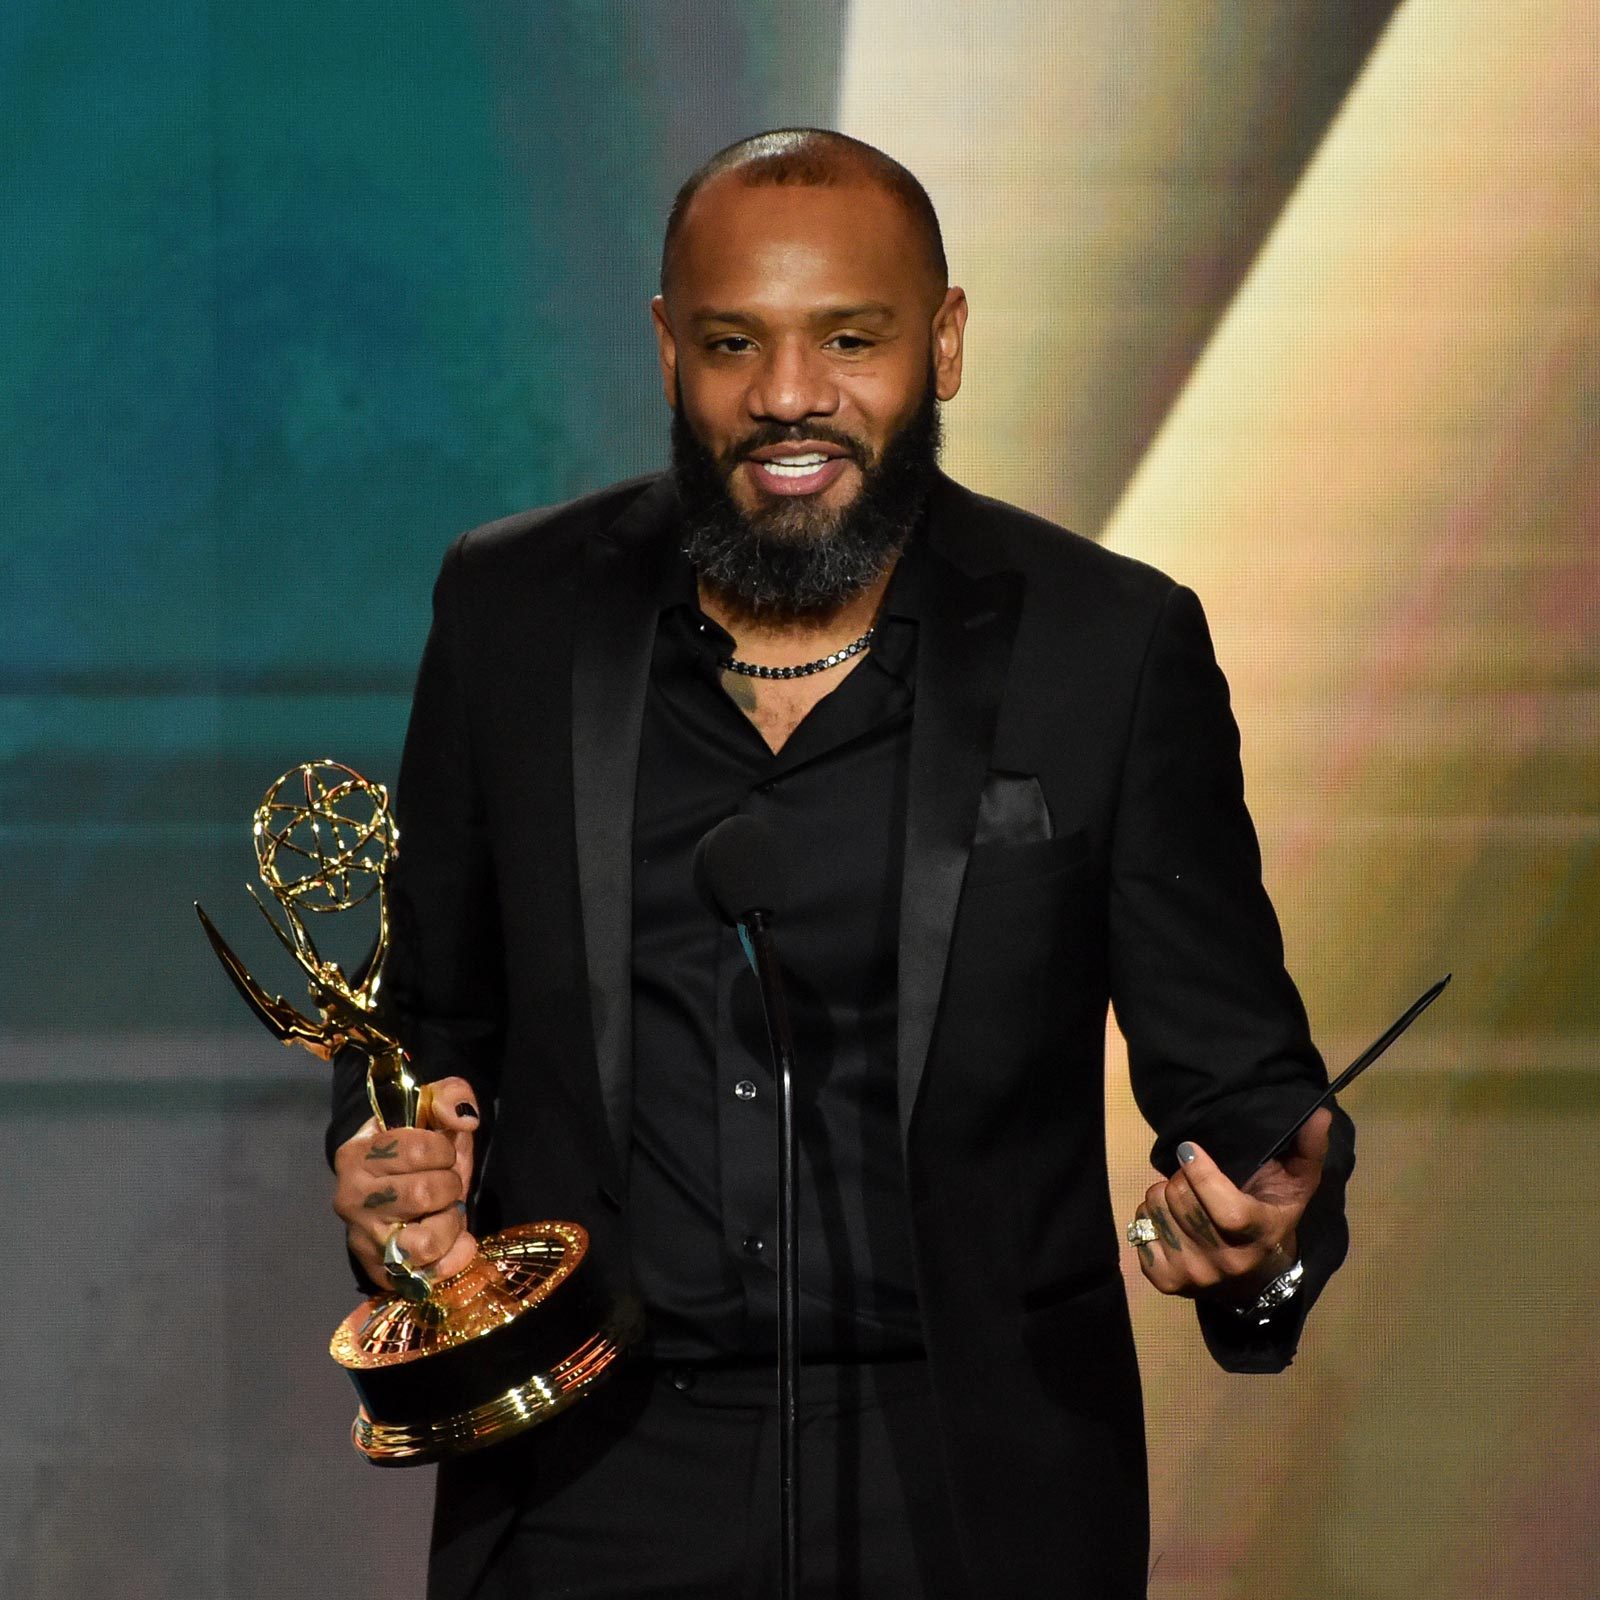 ustin Sutherland, winner of the Culinary Host award for "Taste the Culture," speaks onstage during the 50th Daytime Emmy Creative Arts and Lifestyle Awards